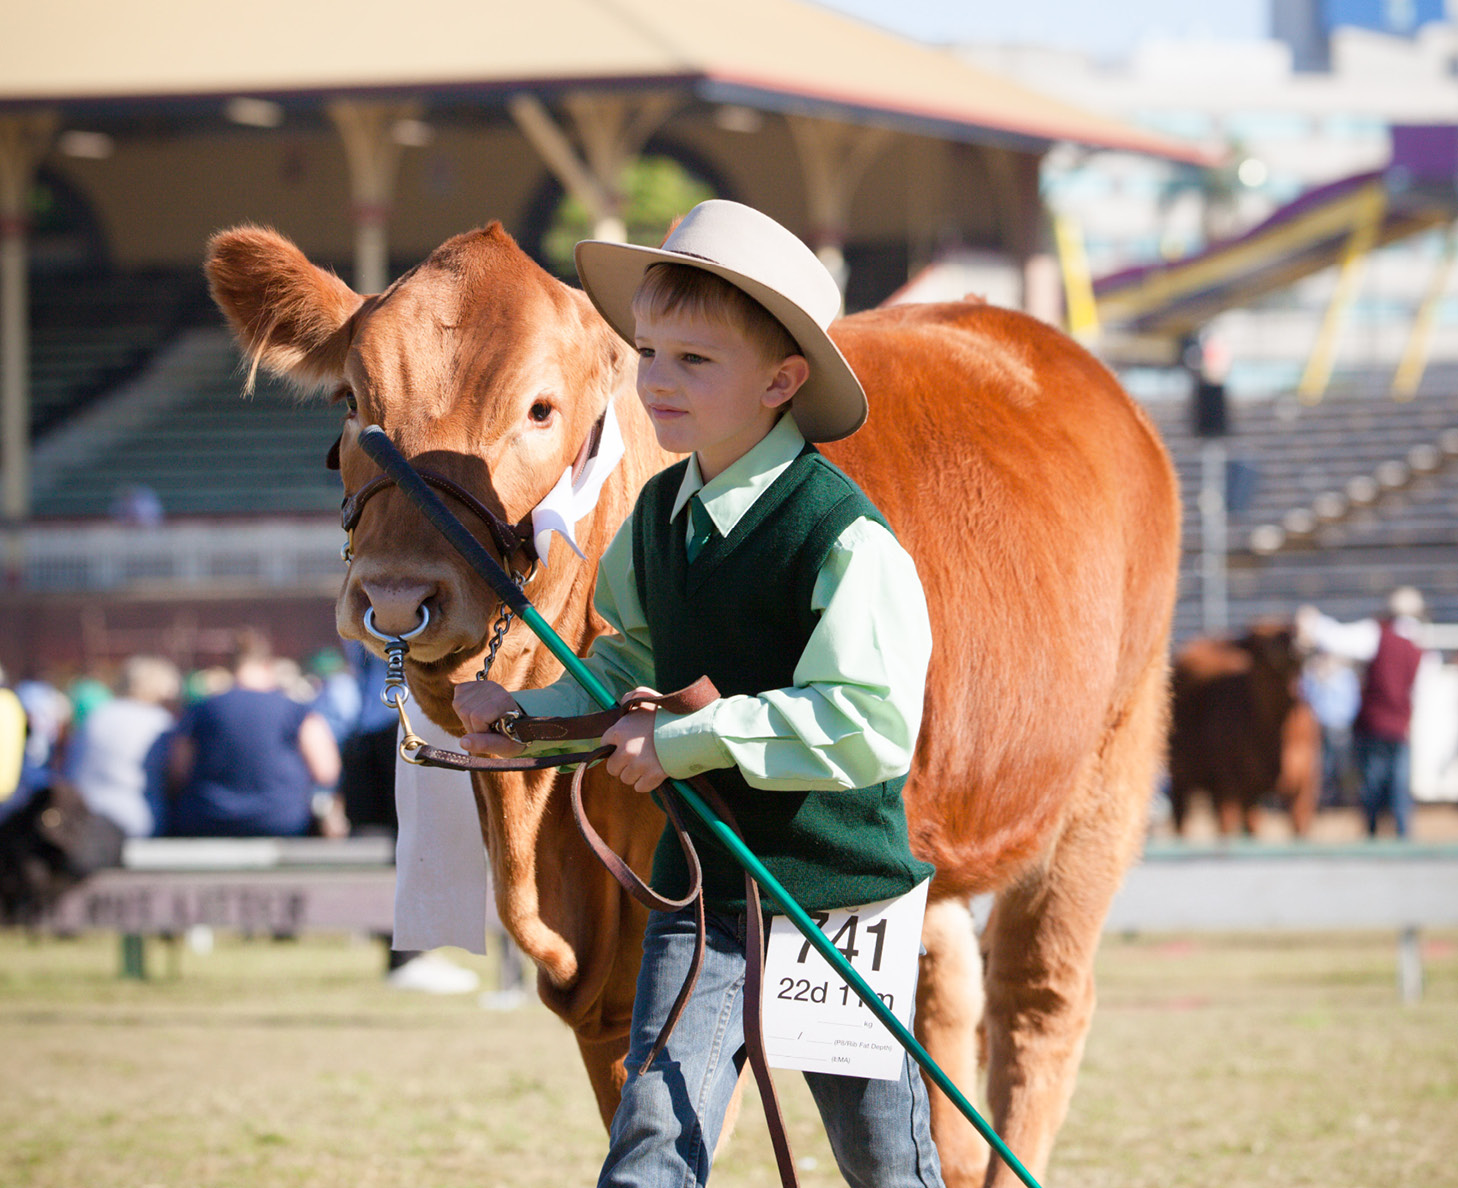 Agriculture at the Royal Queensland Show